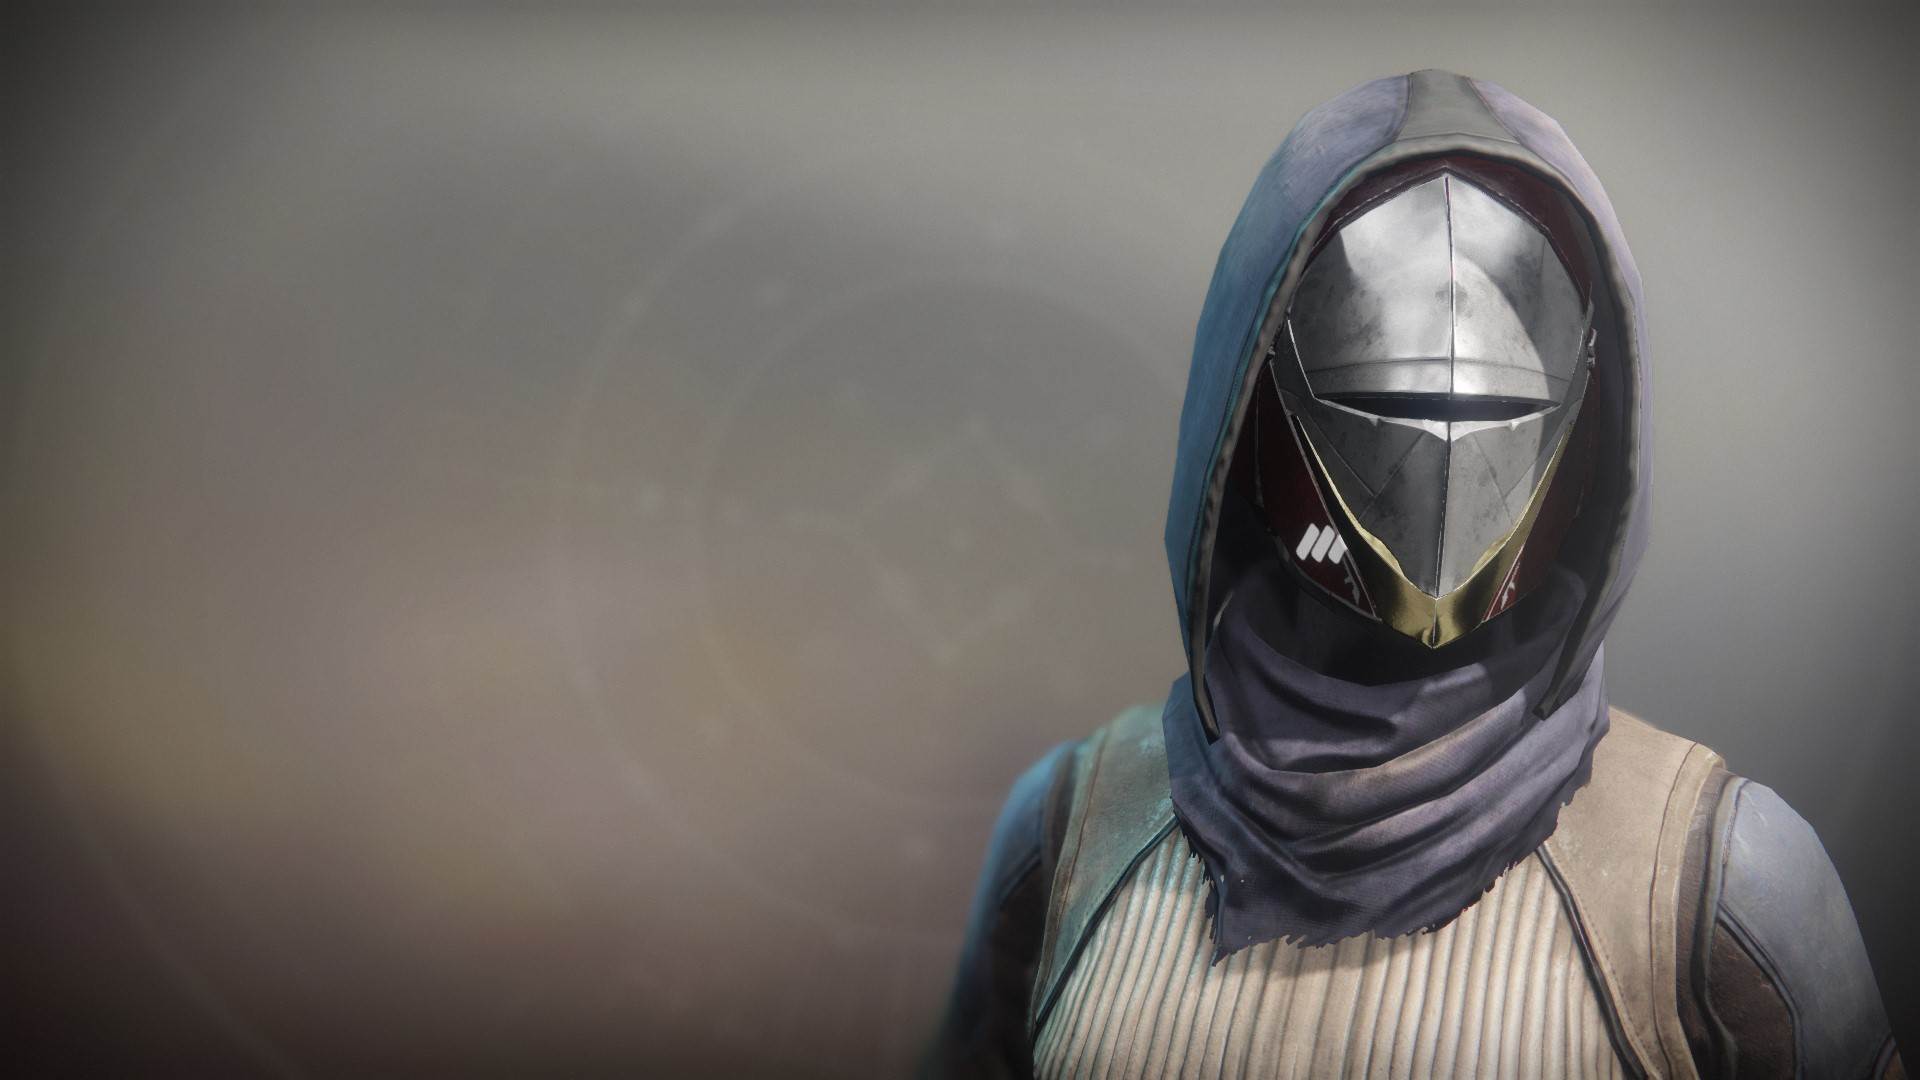 An in-game render of the Sovereign Mask.